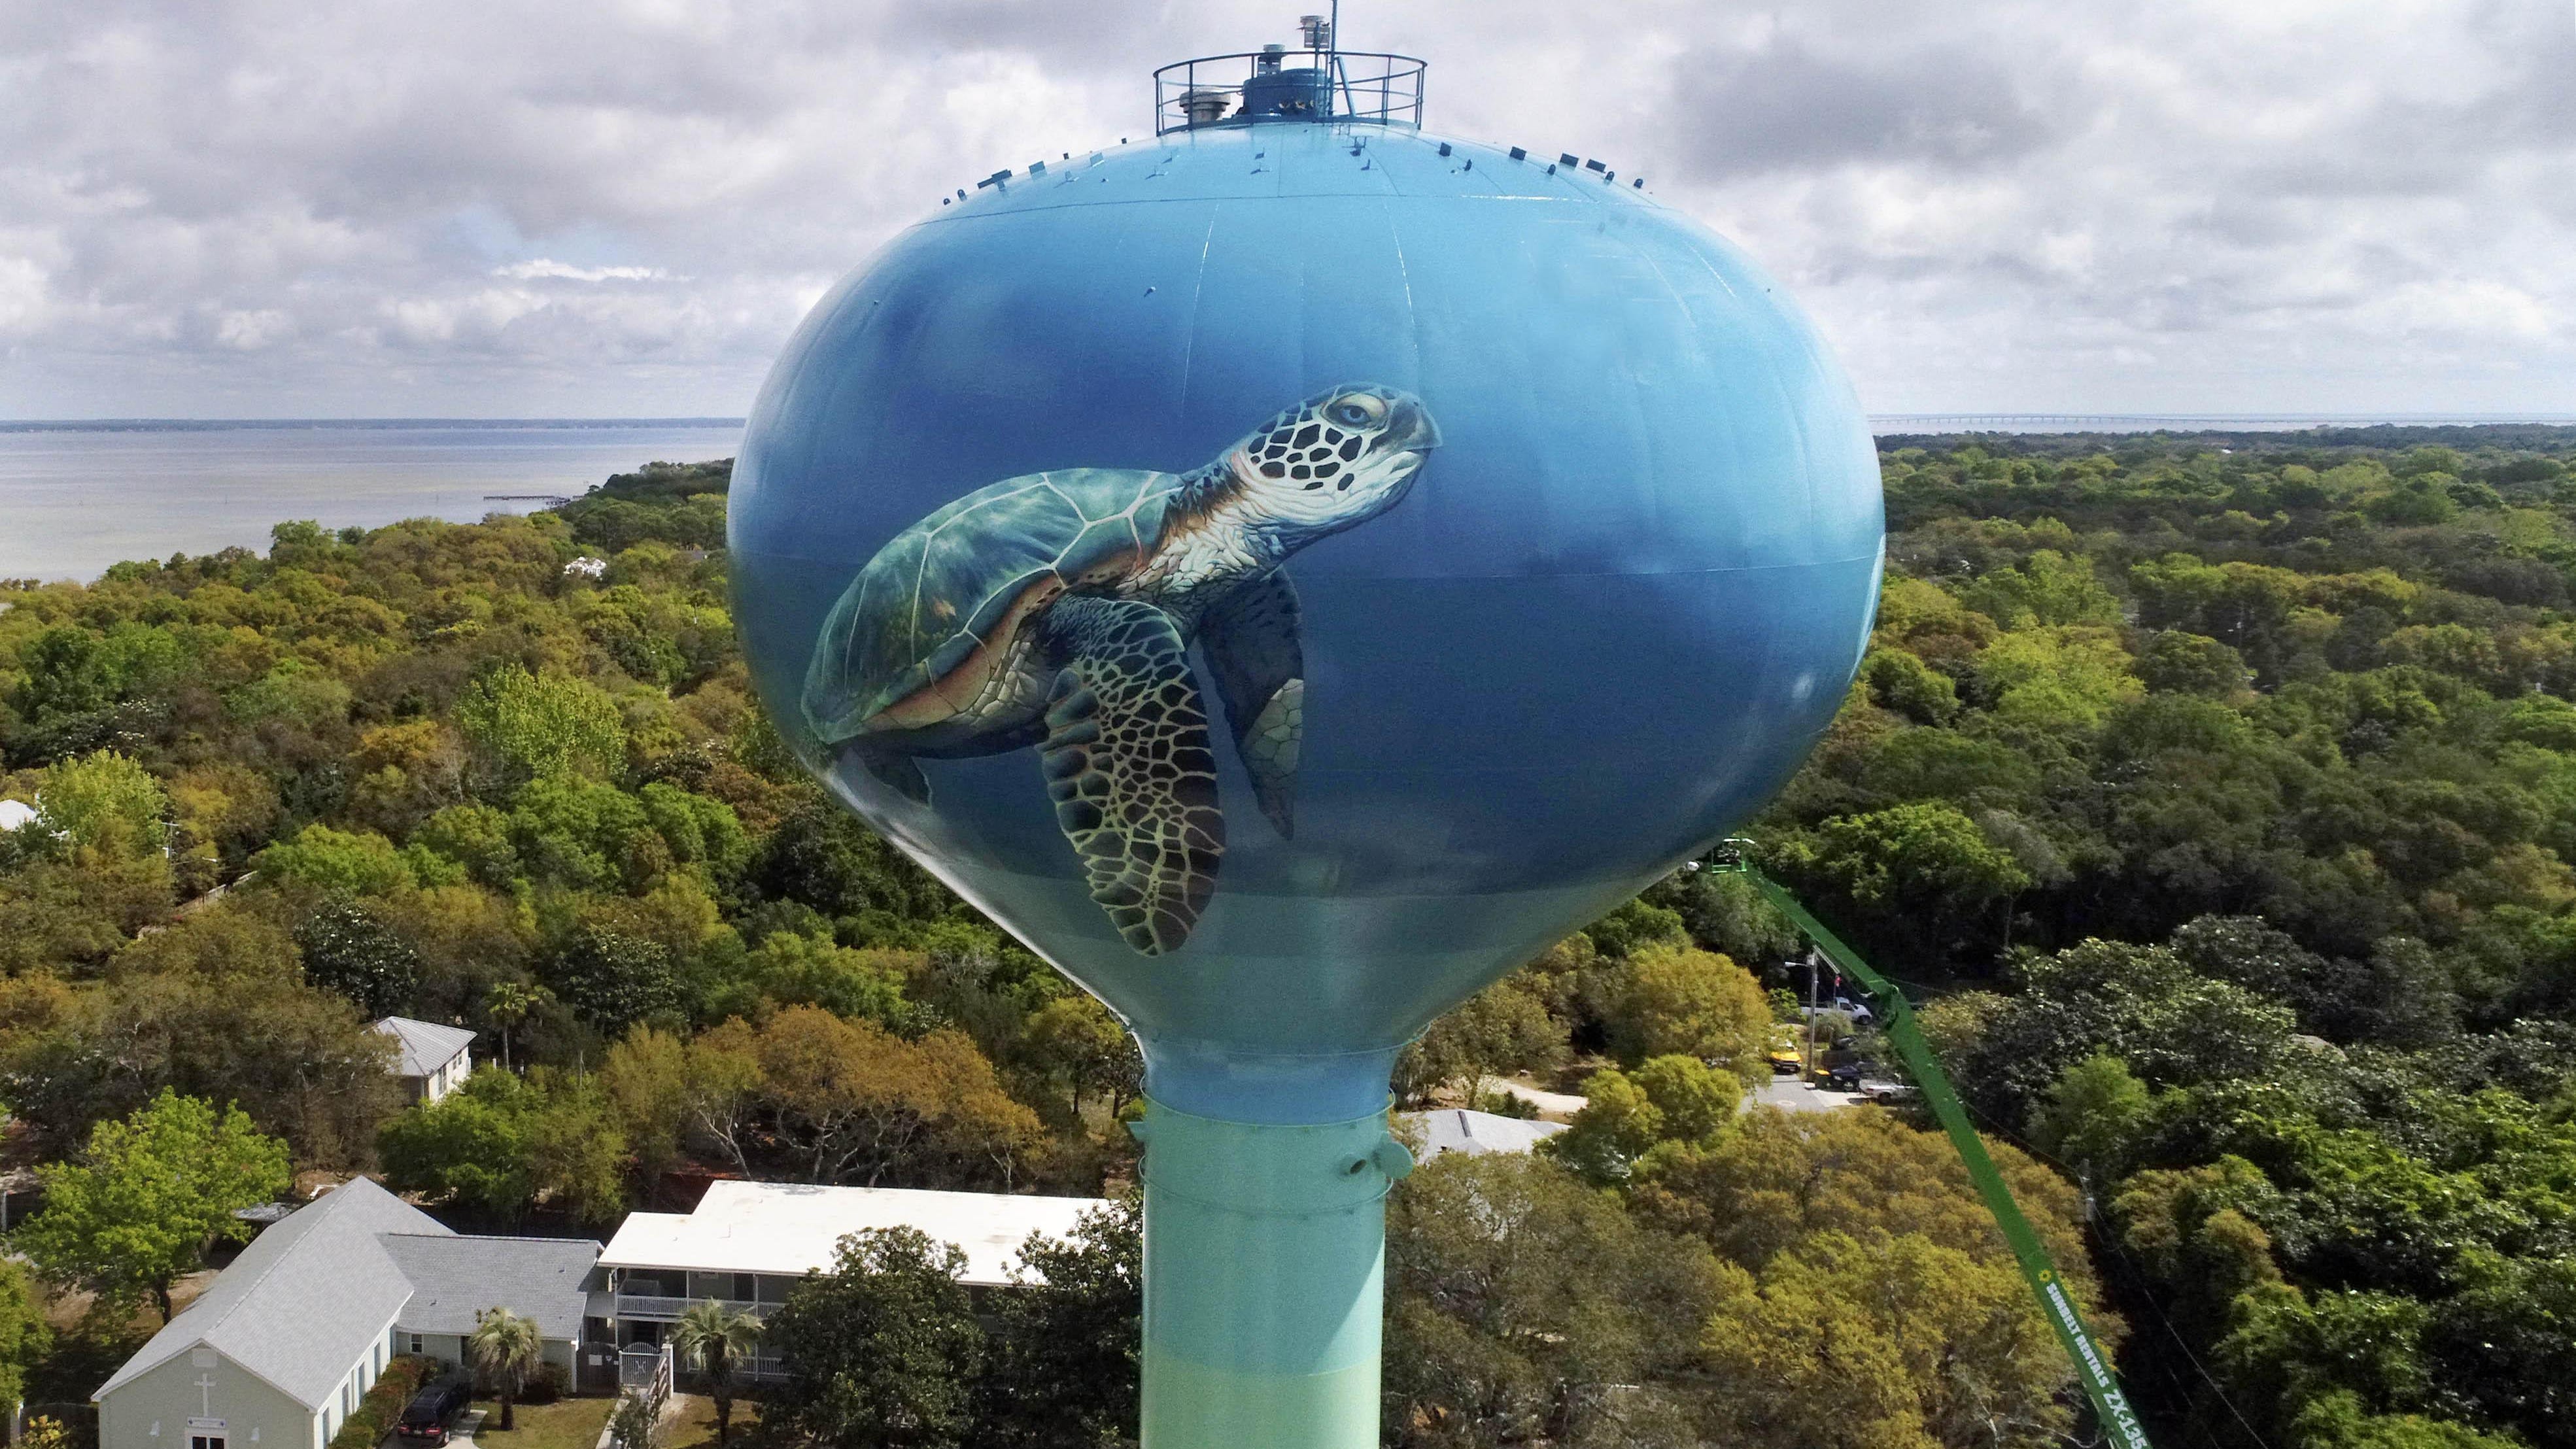 Artist Eric Henn painted this sea turtle on the south side of the new water tower off of Calhoun Avenue in Destin. Henn is currently working on the other side painting a pod of dolphins.